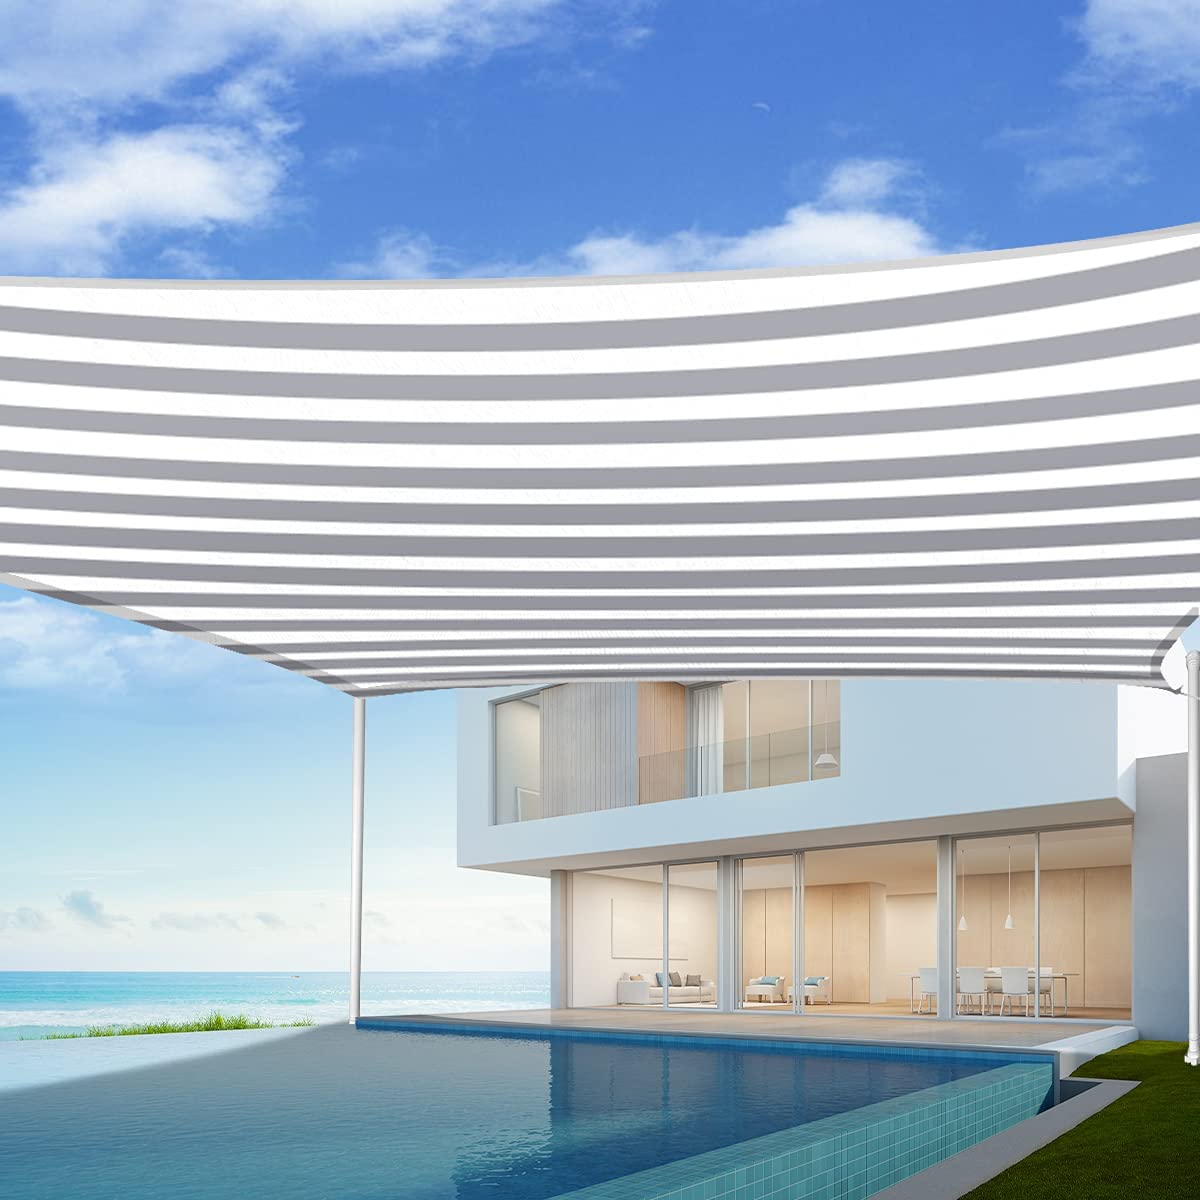 10'x13' Rectangle Shade Sail-White and grey